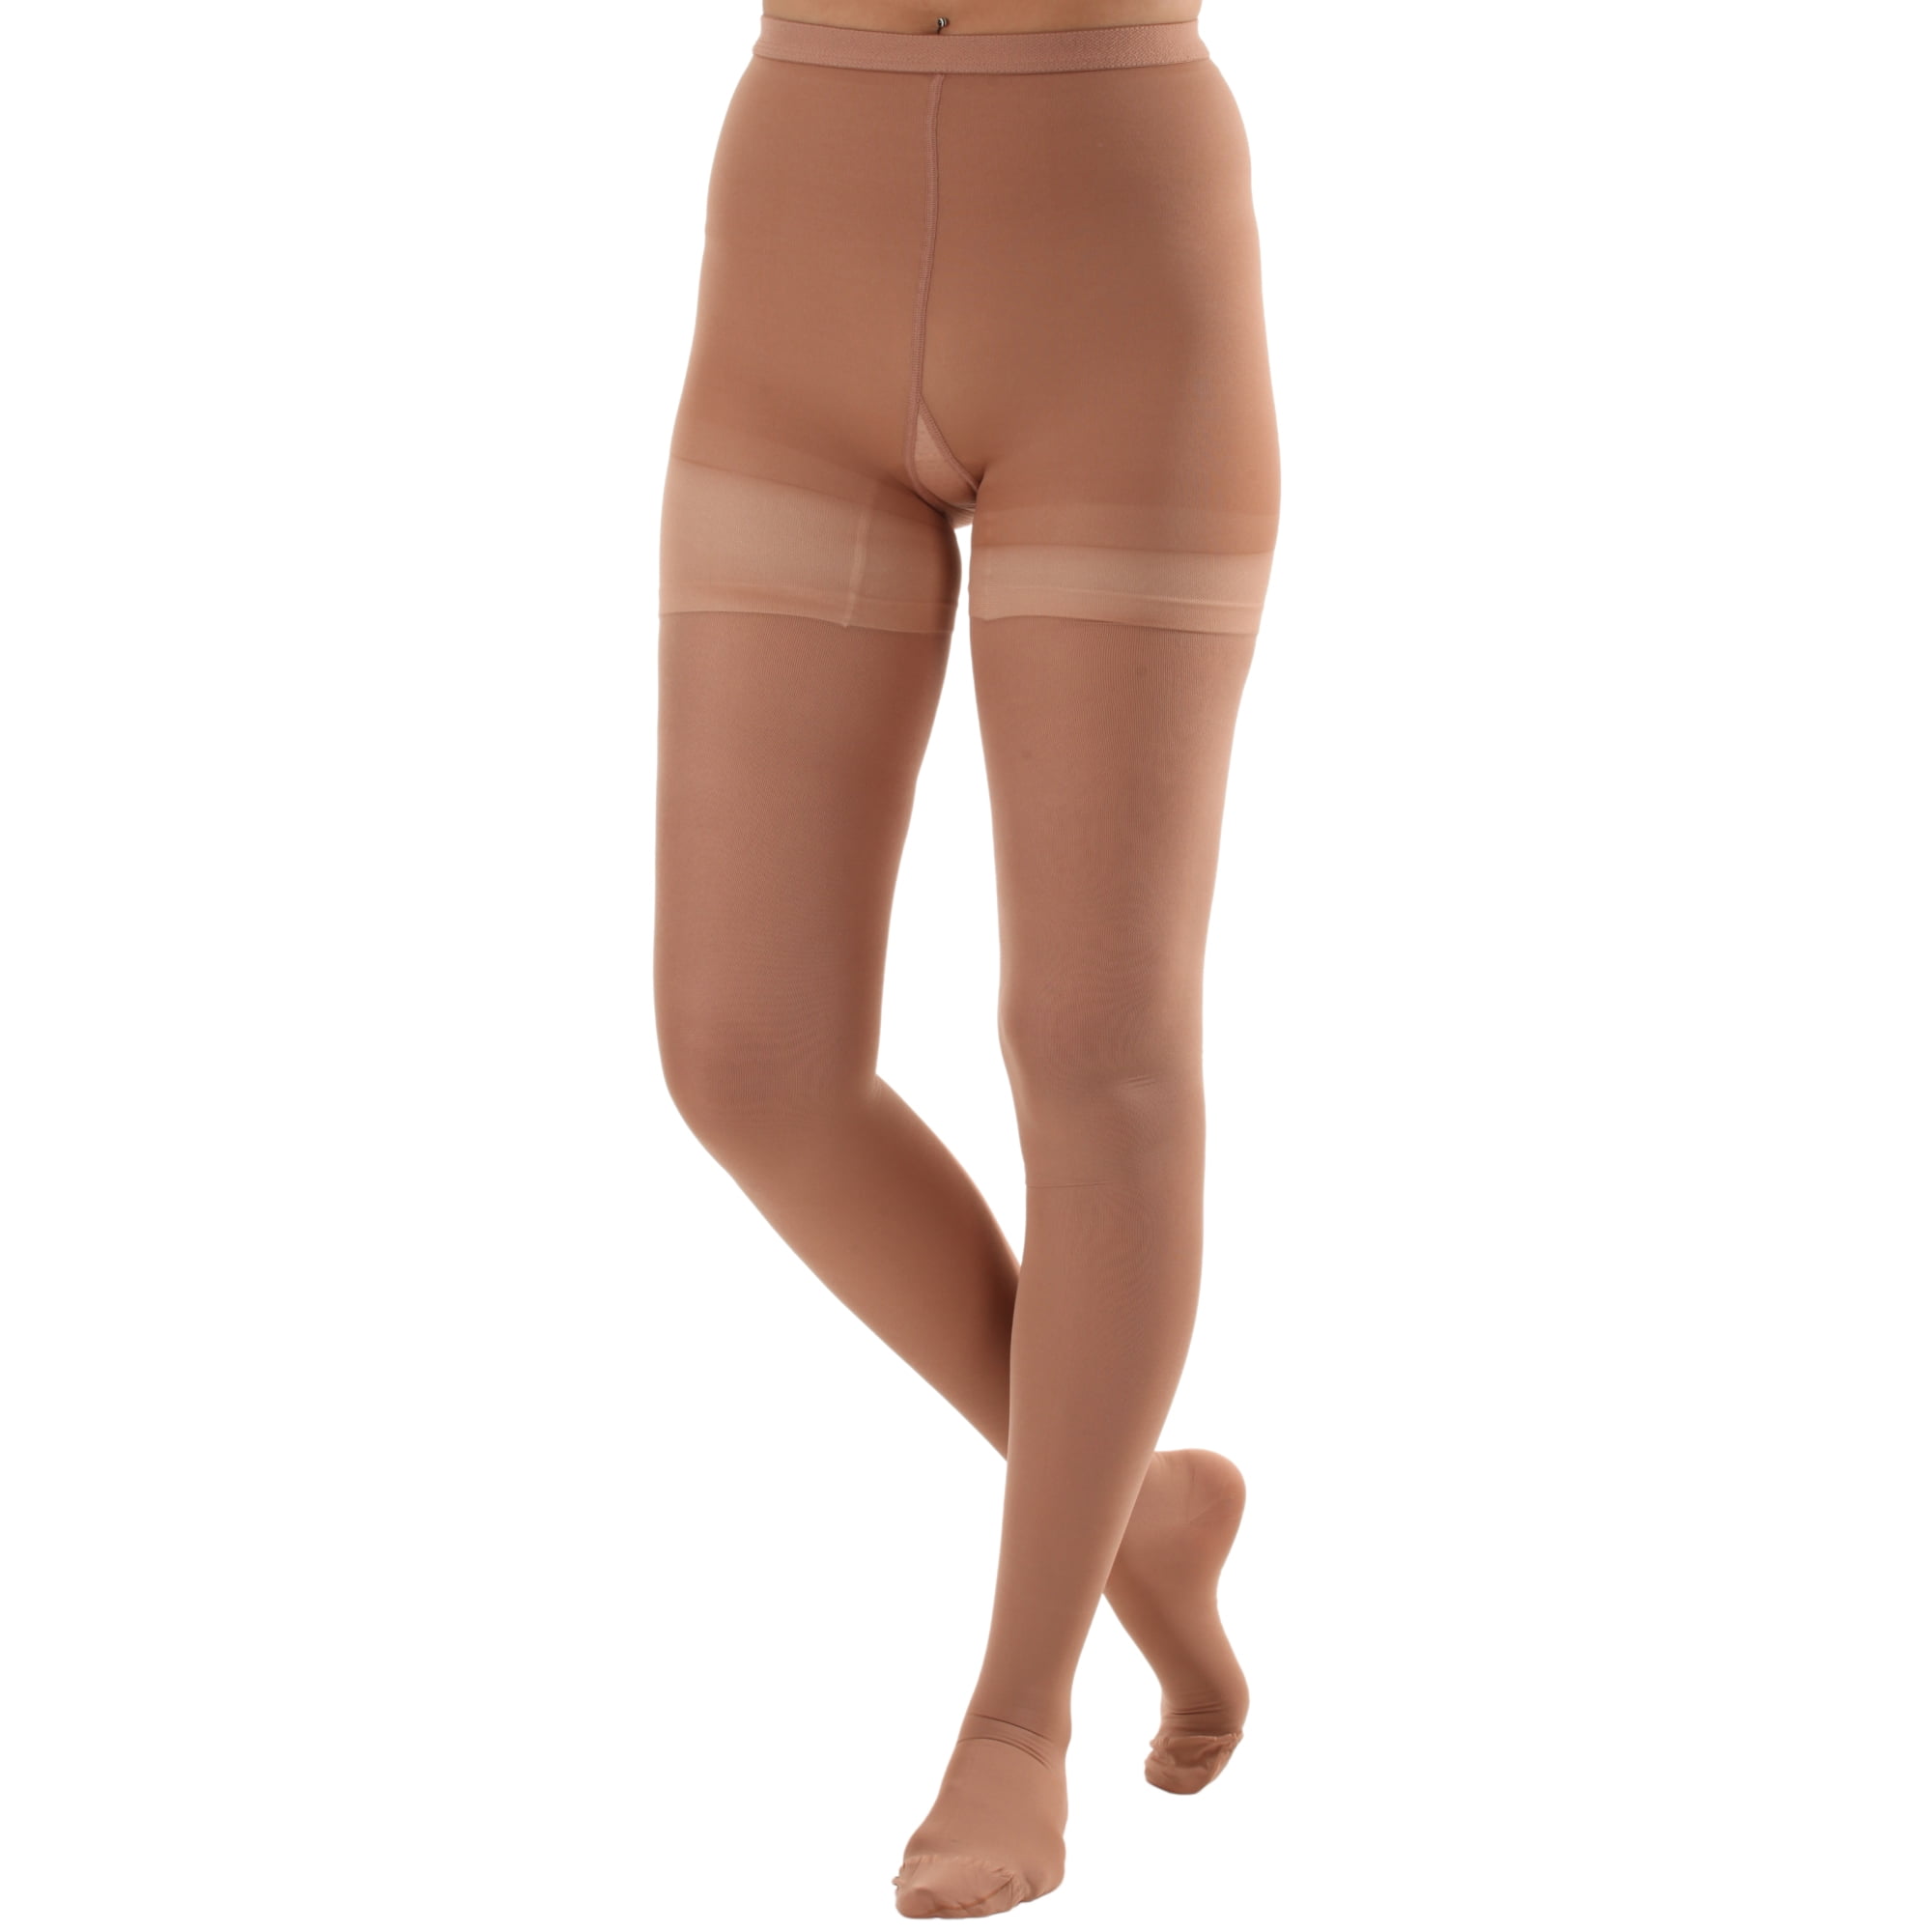 Made in USA - Compression Tights for Women Circulation 20-30mmHg - Beige,  Medium 